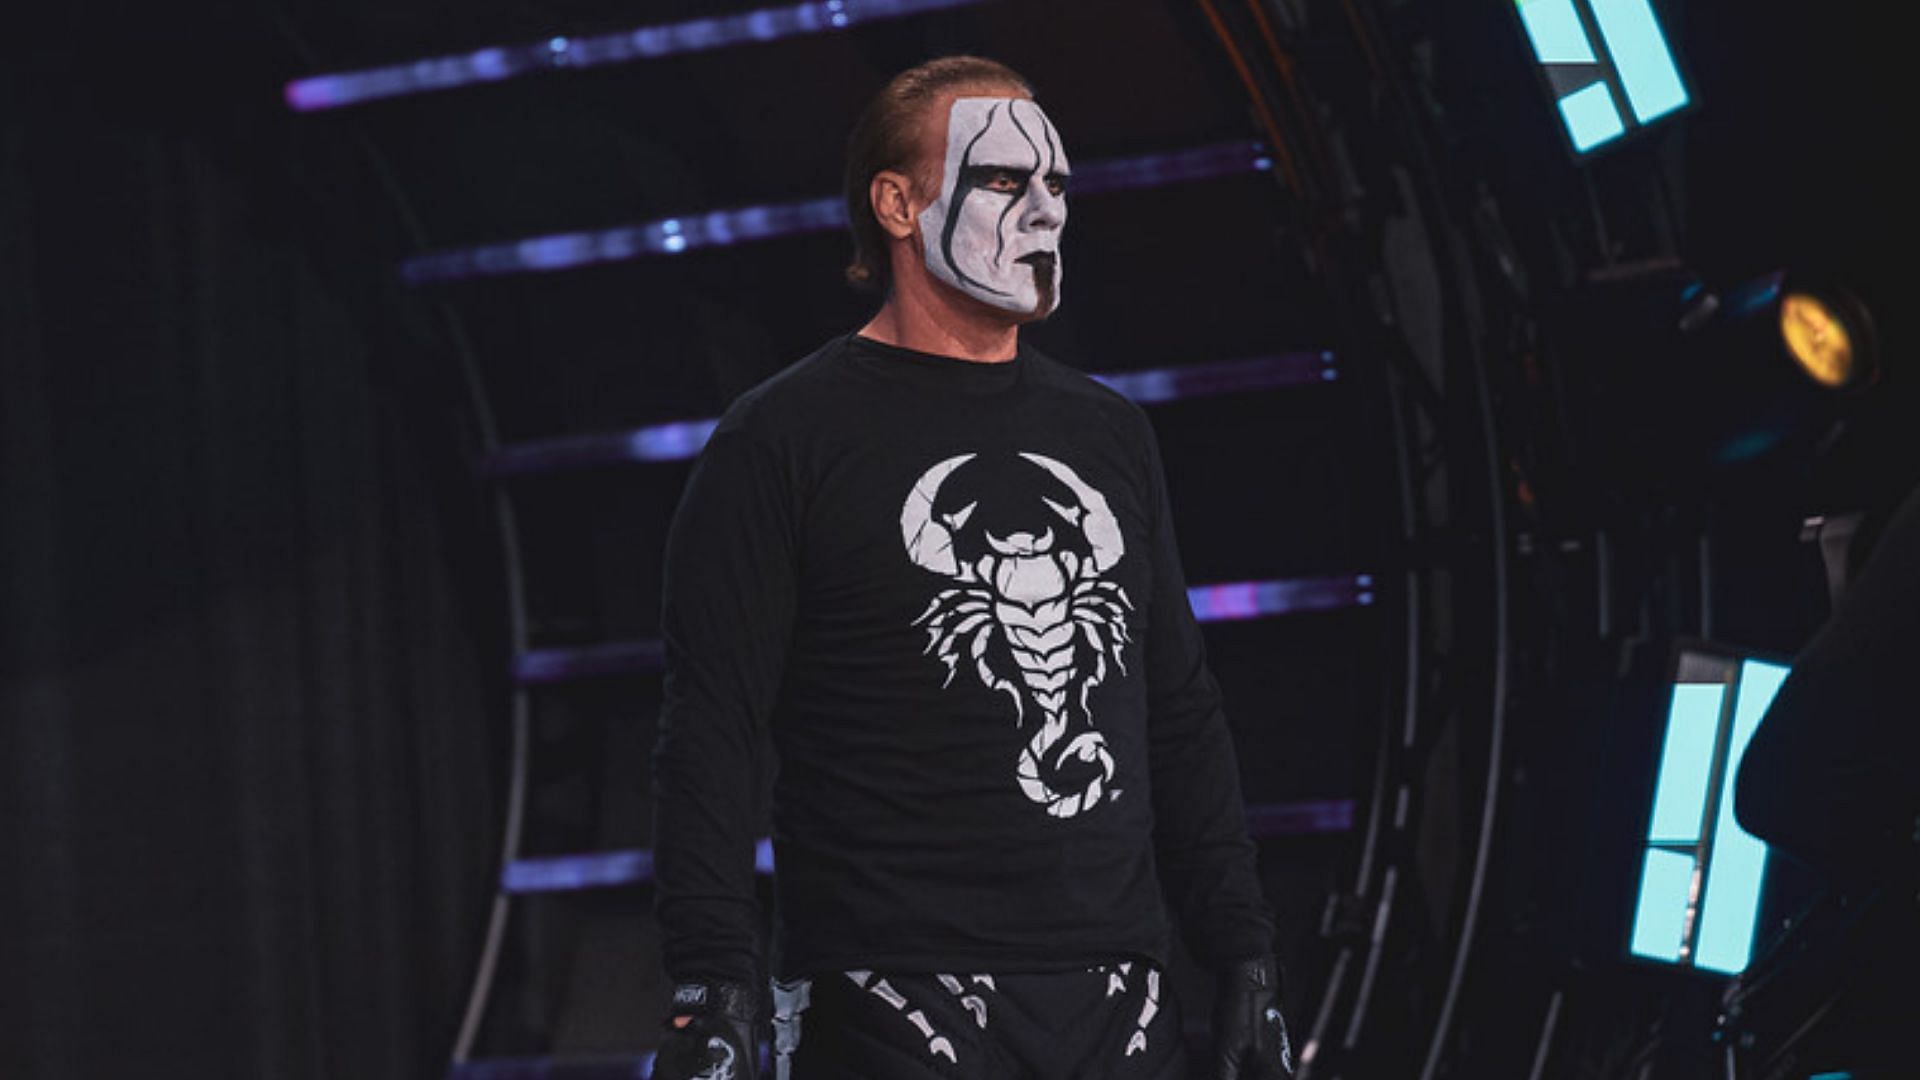 Sting at an AEW Dynamite event in 2022.